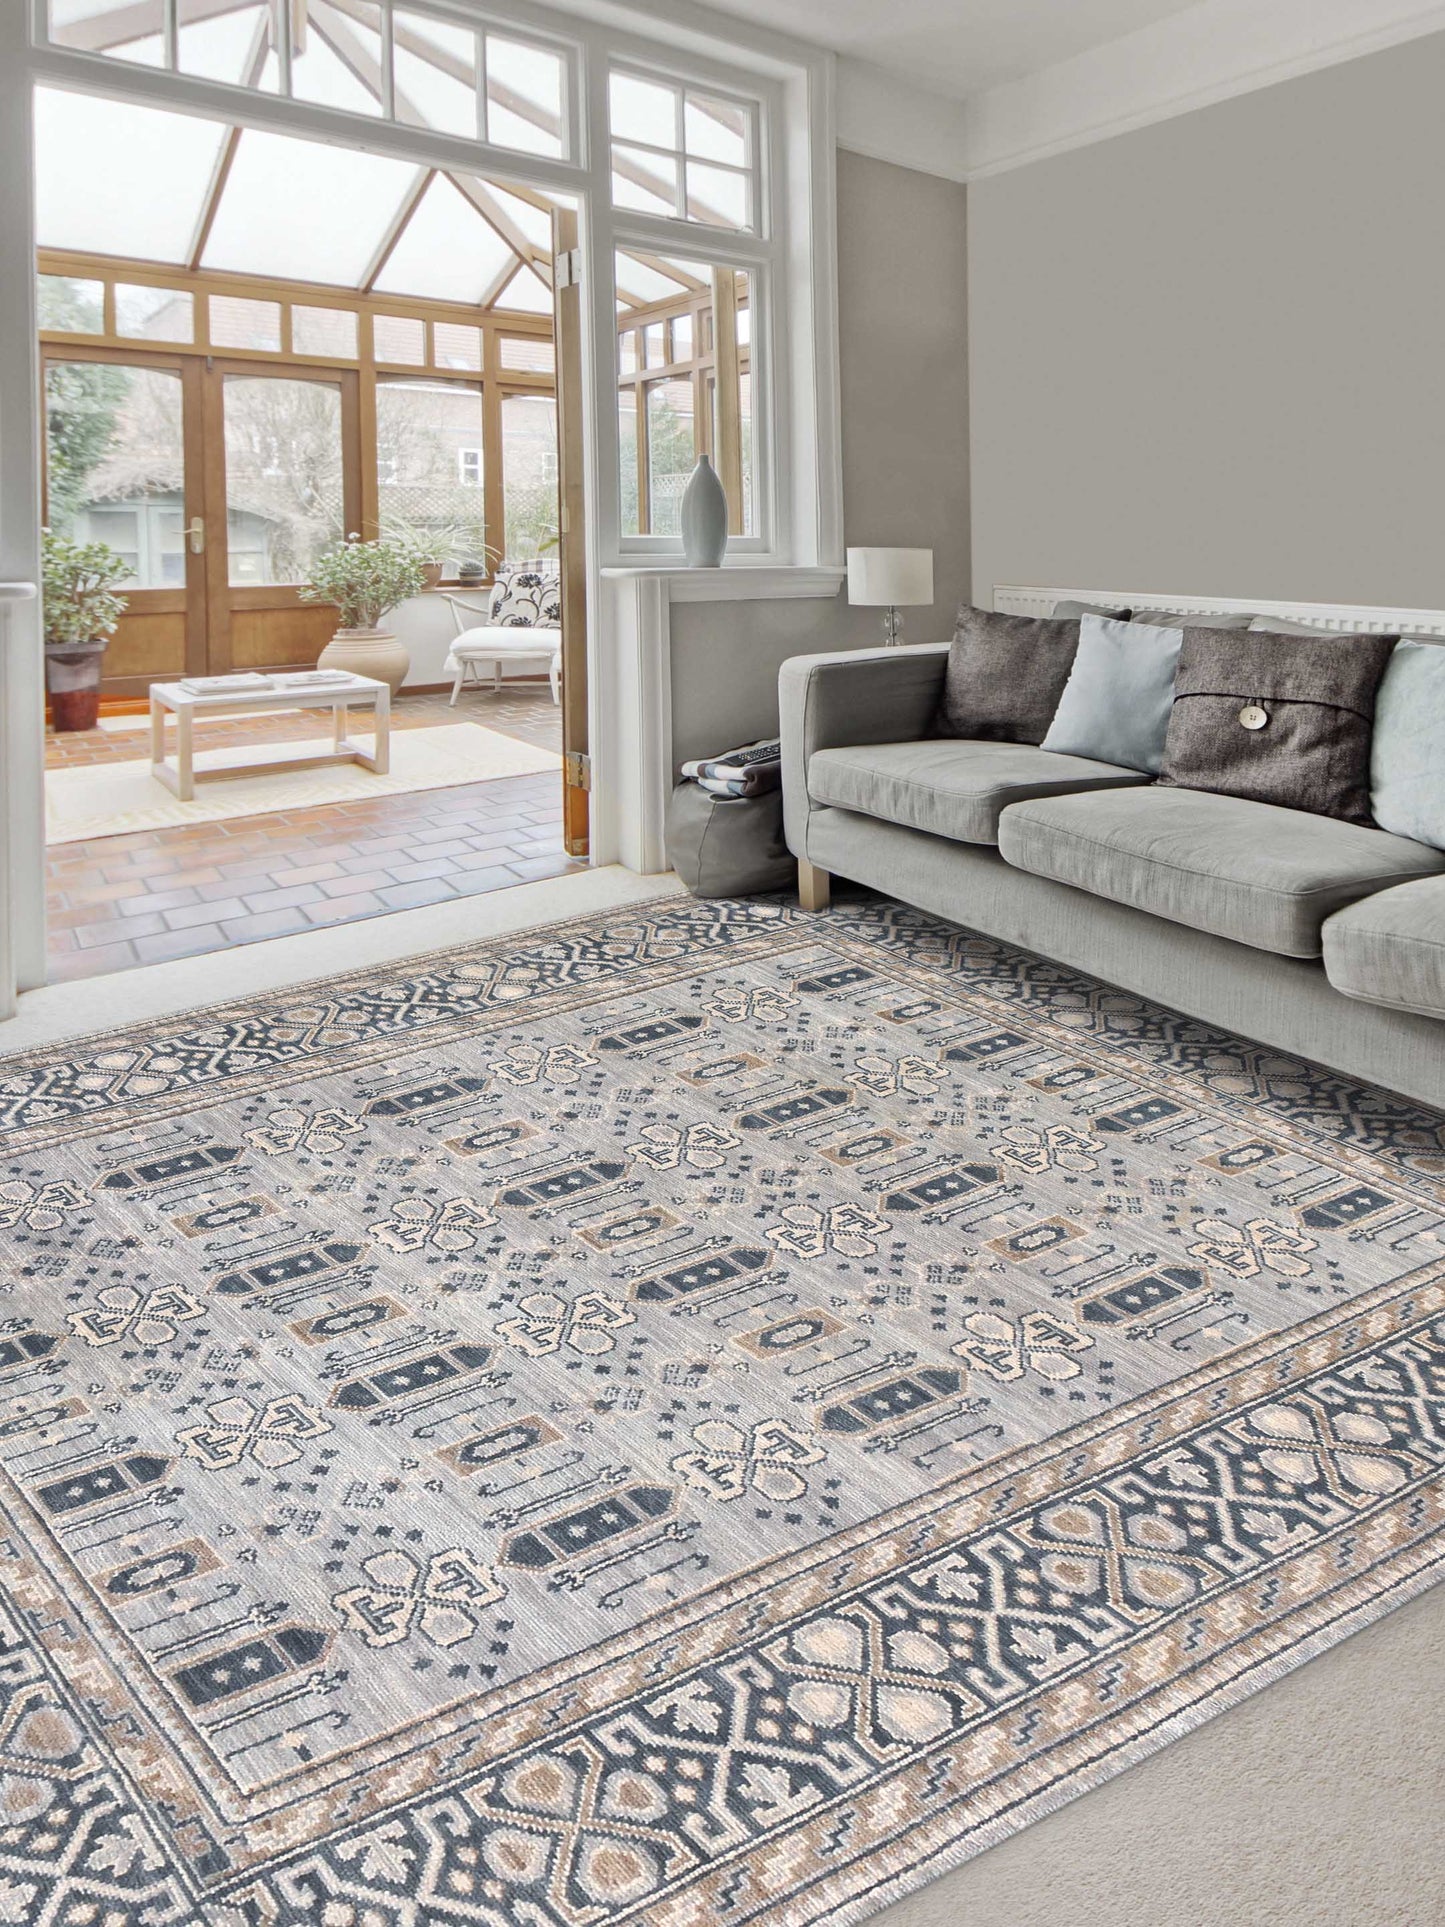 Limited BALLINA BA-433 BLUE  Traditional Knotted Rug